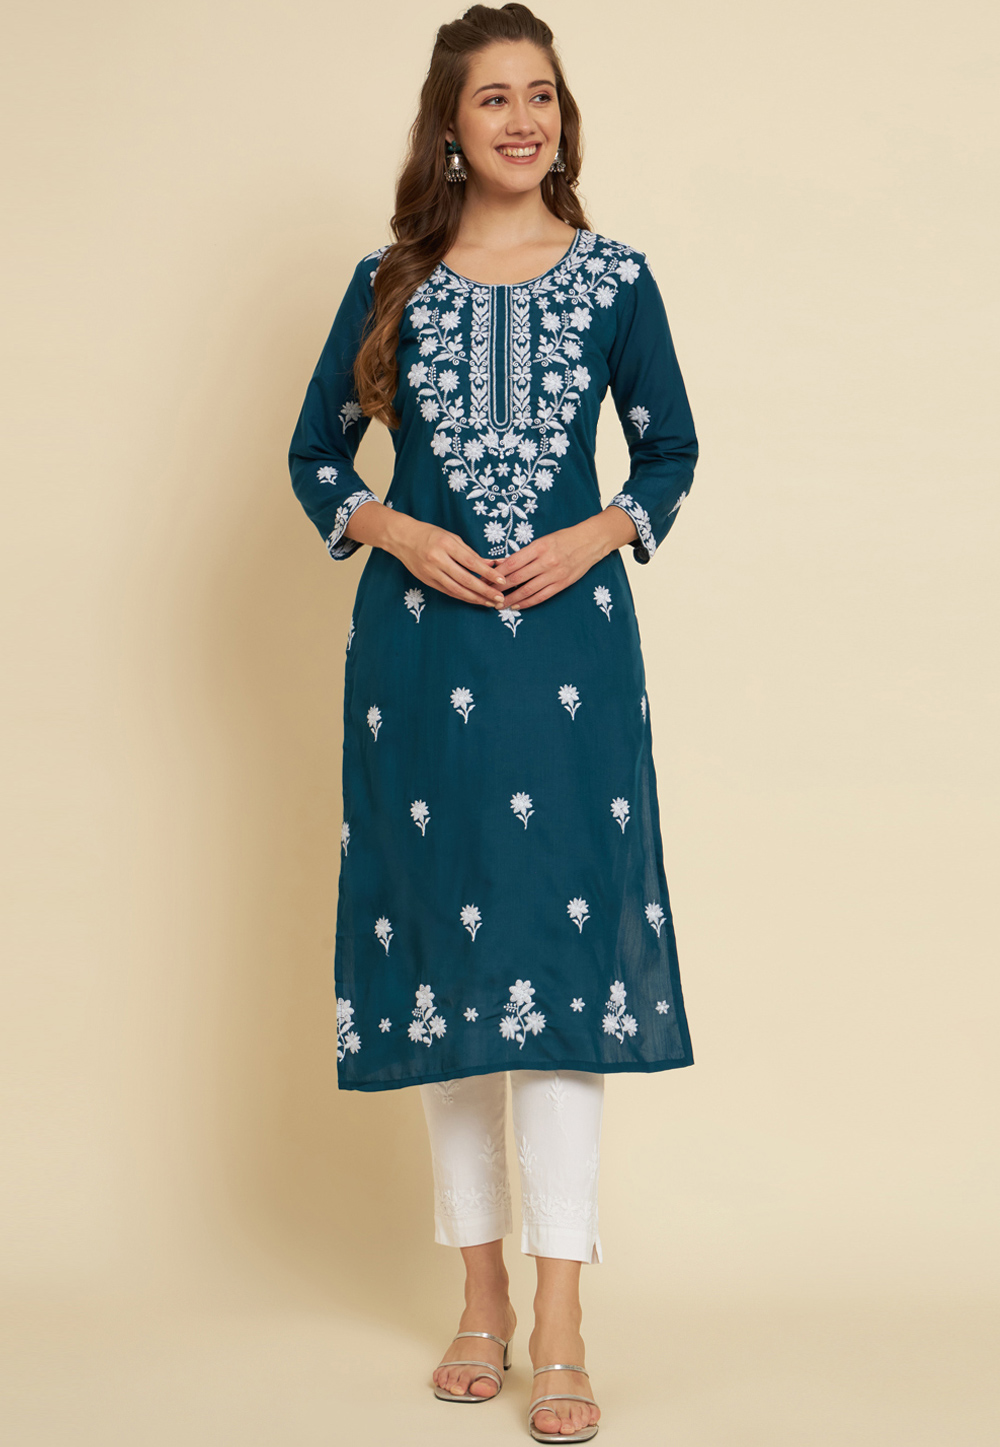 Teal Cotton Tunic 265881